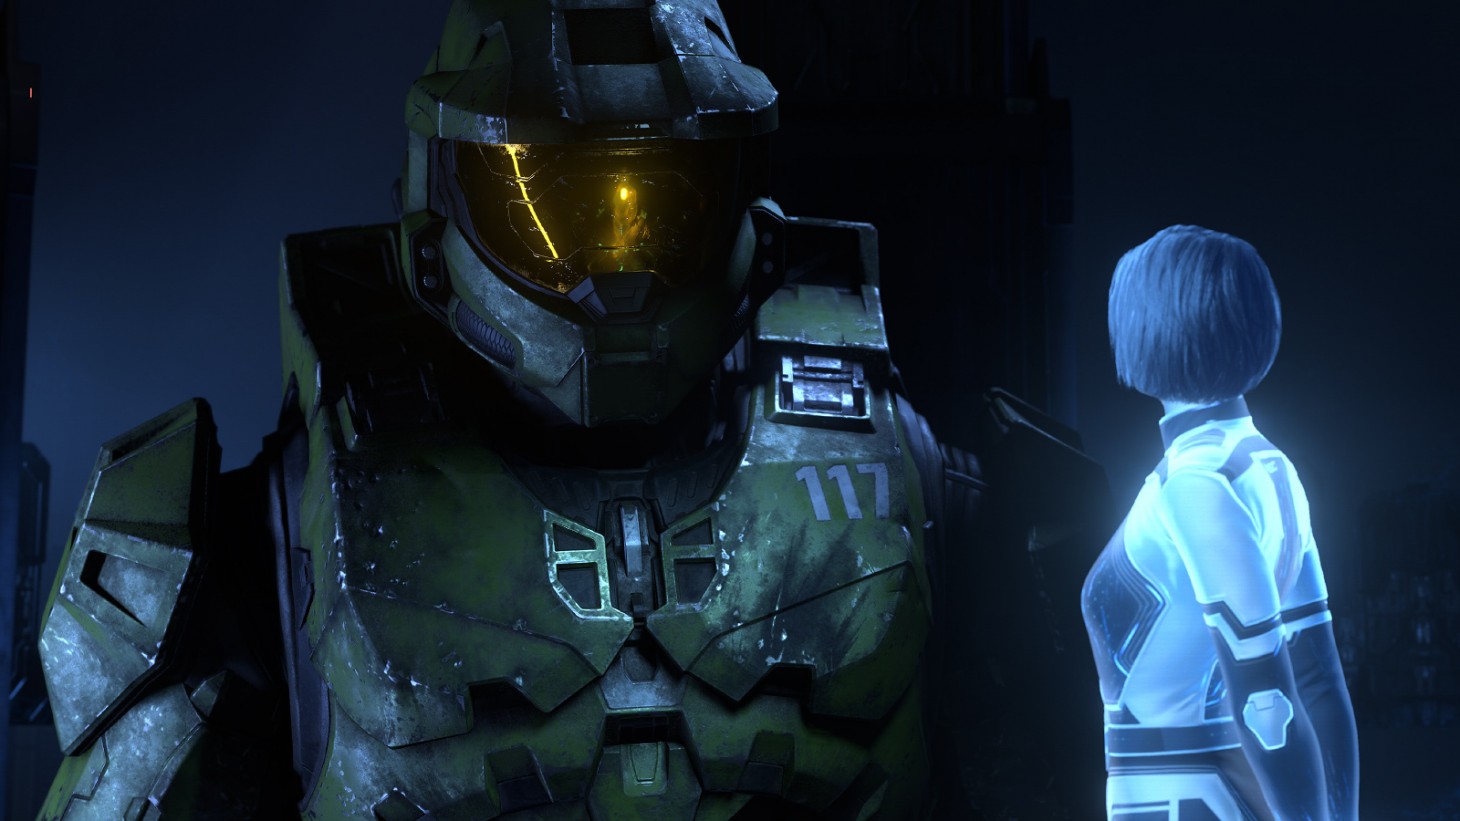 The Long-Awaited 'Halo Infinite' Game Is Struggling to Retain Players